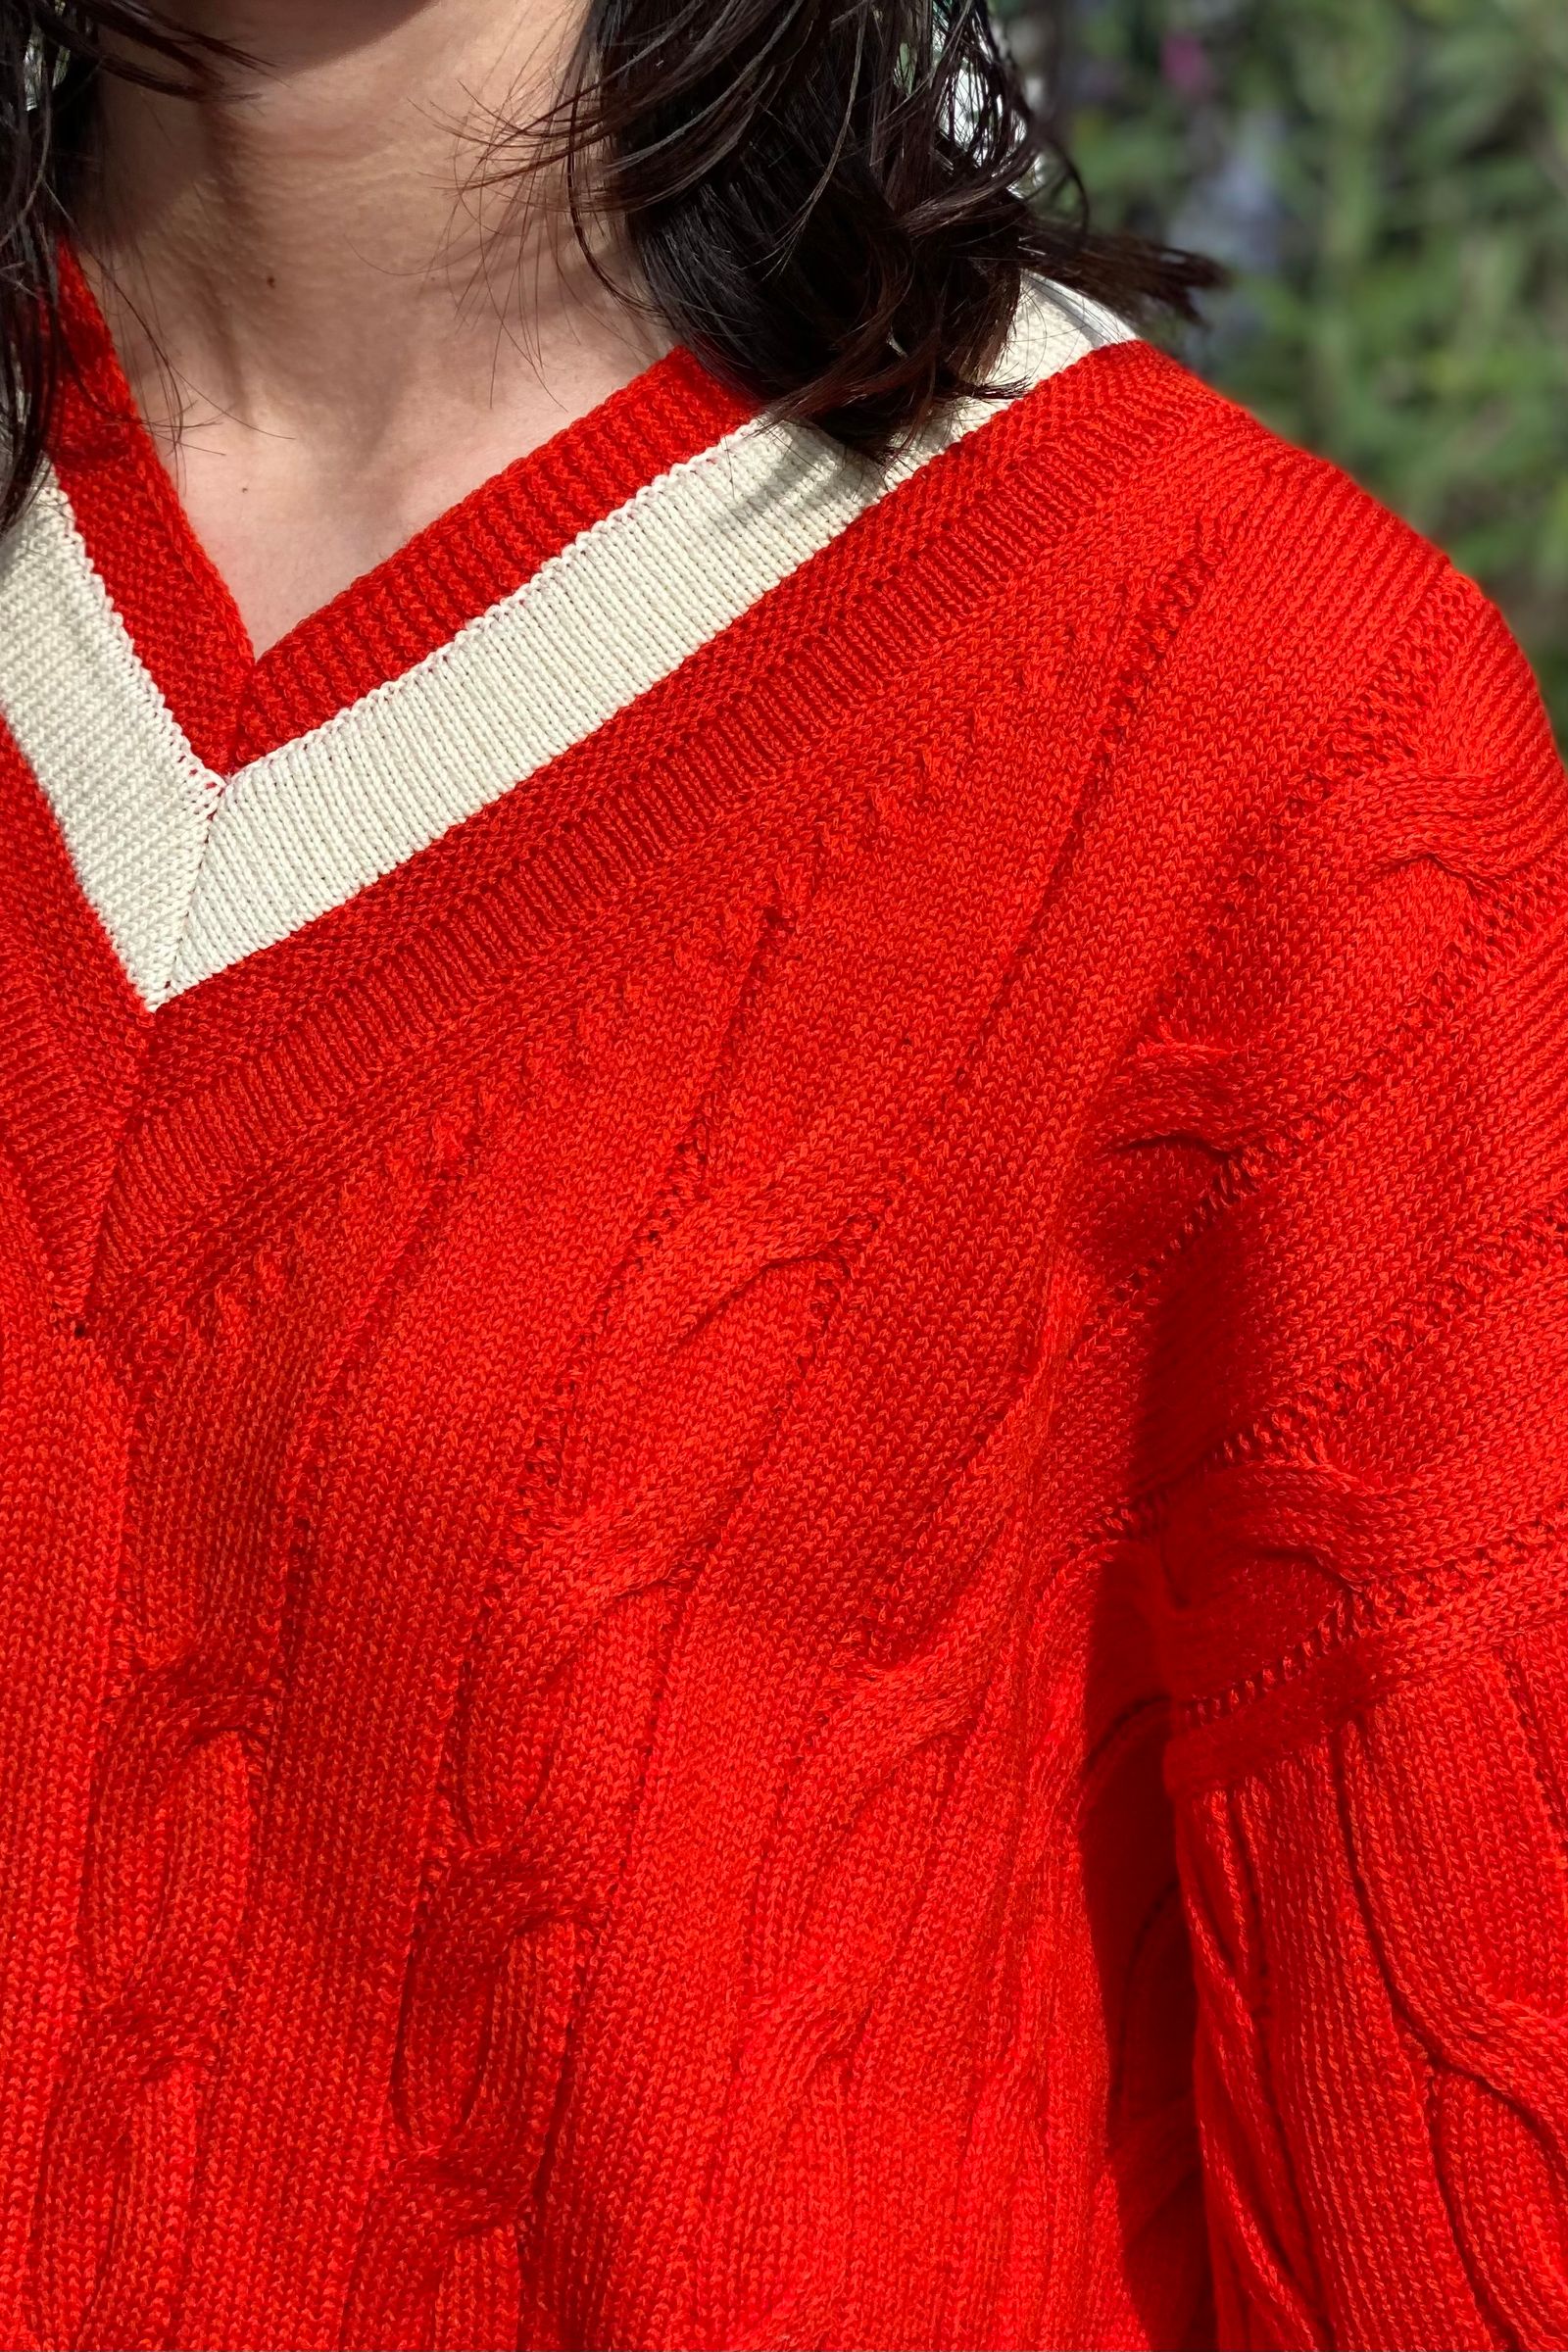 MEIAS - lily w/pe childen sweater -red- 22aw unisex | asterisk